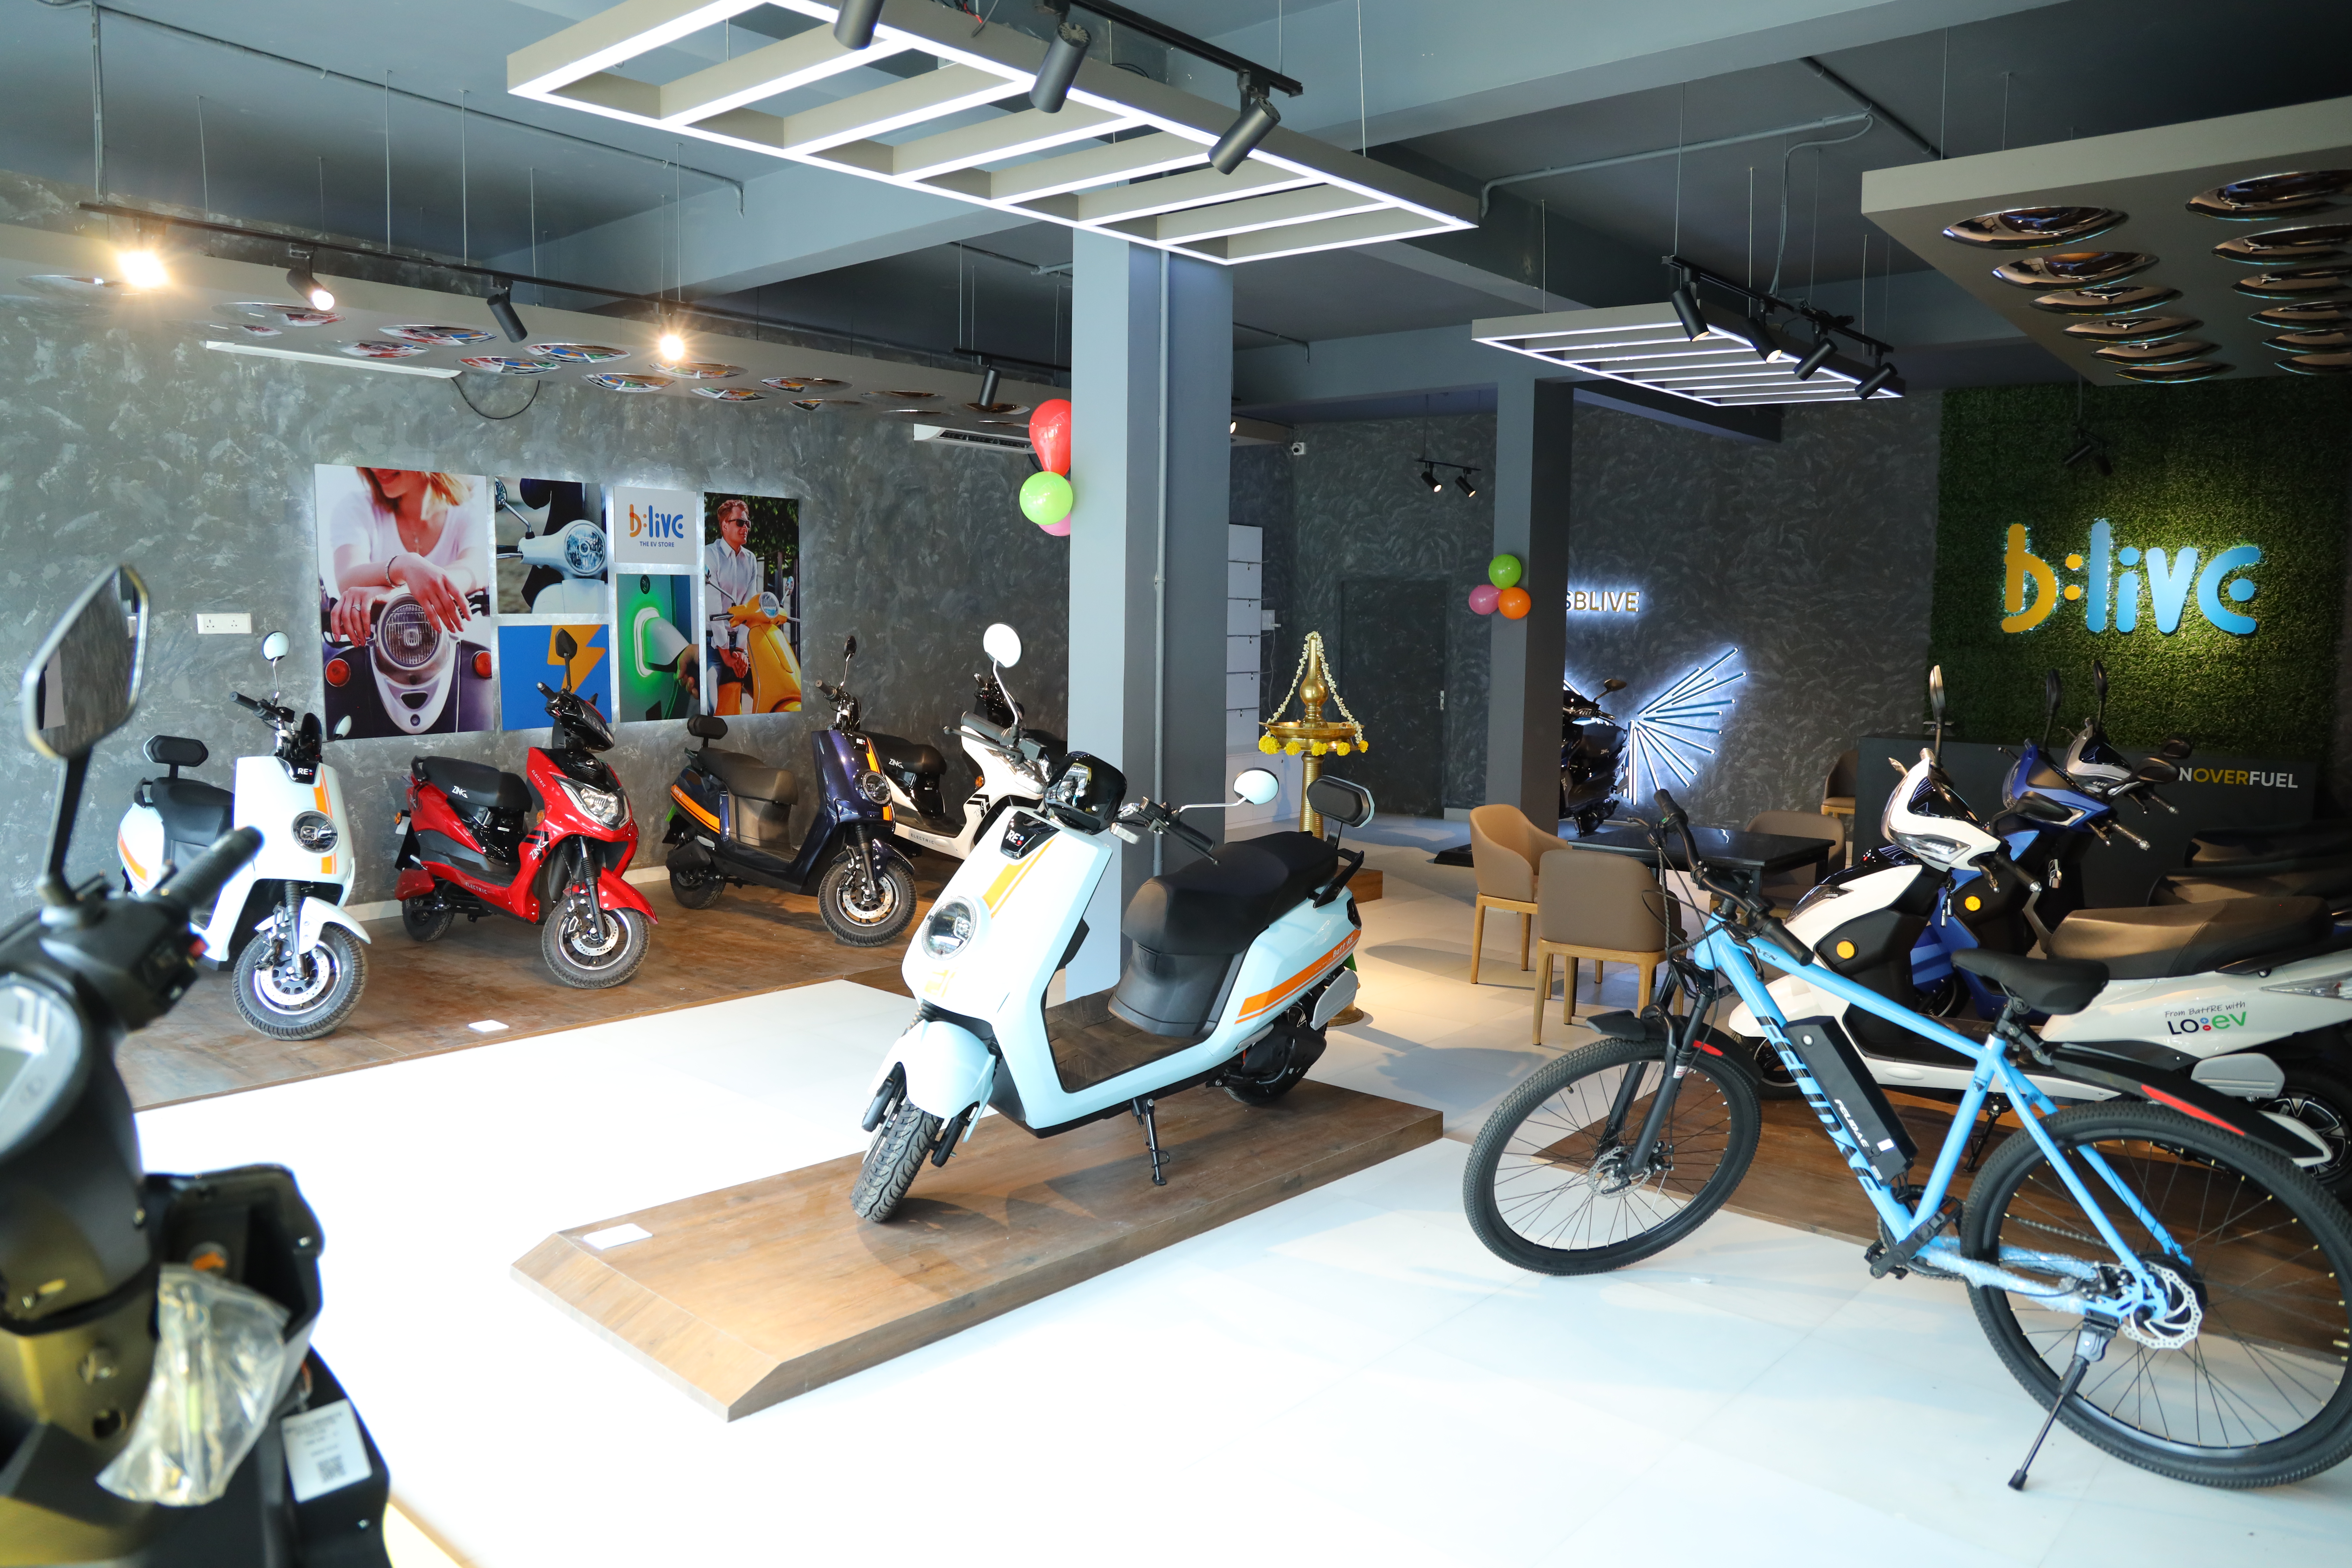 BLive store inside look with EV scooters and Bicycle on display